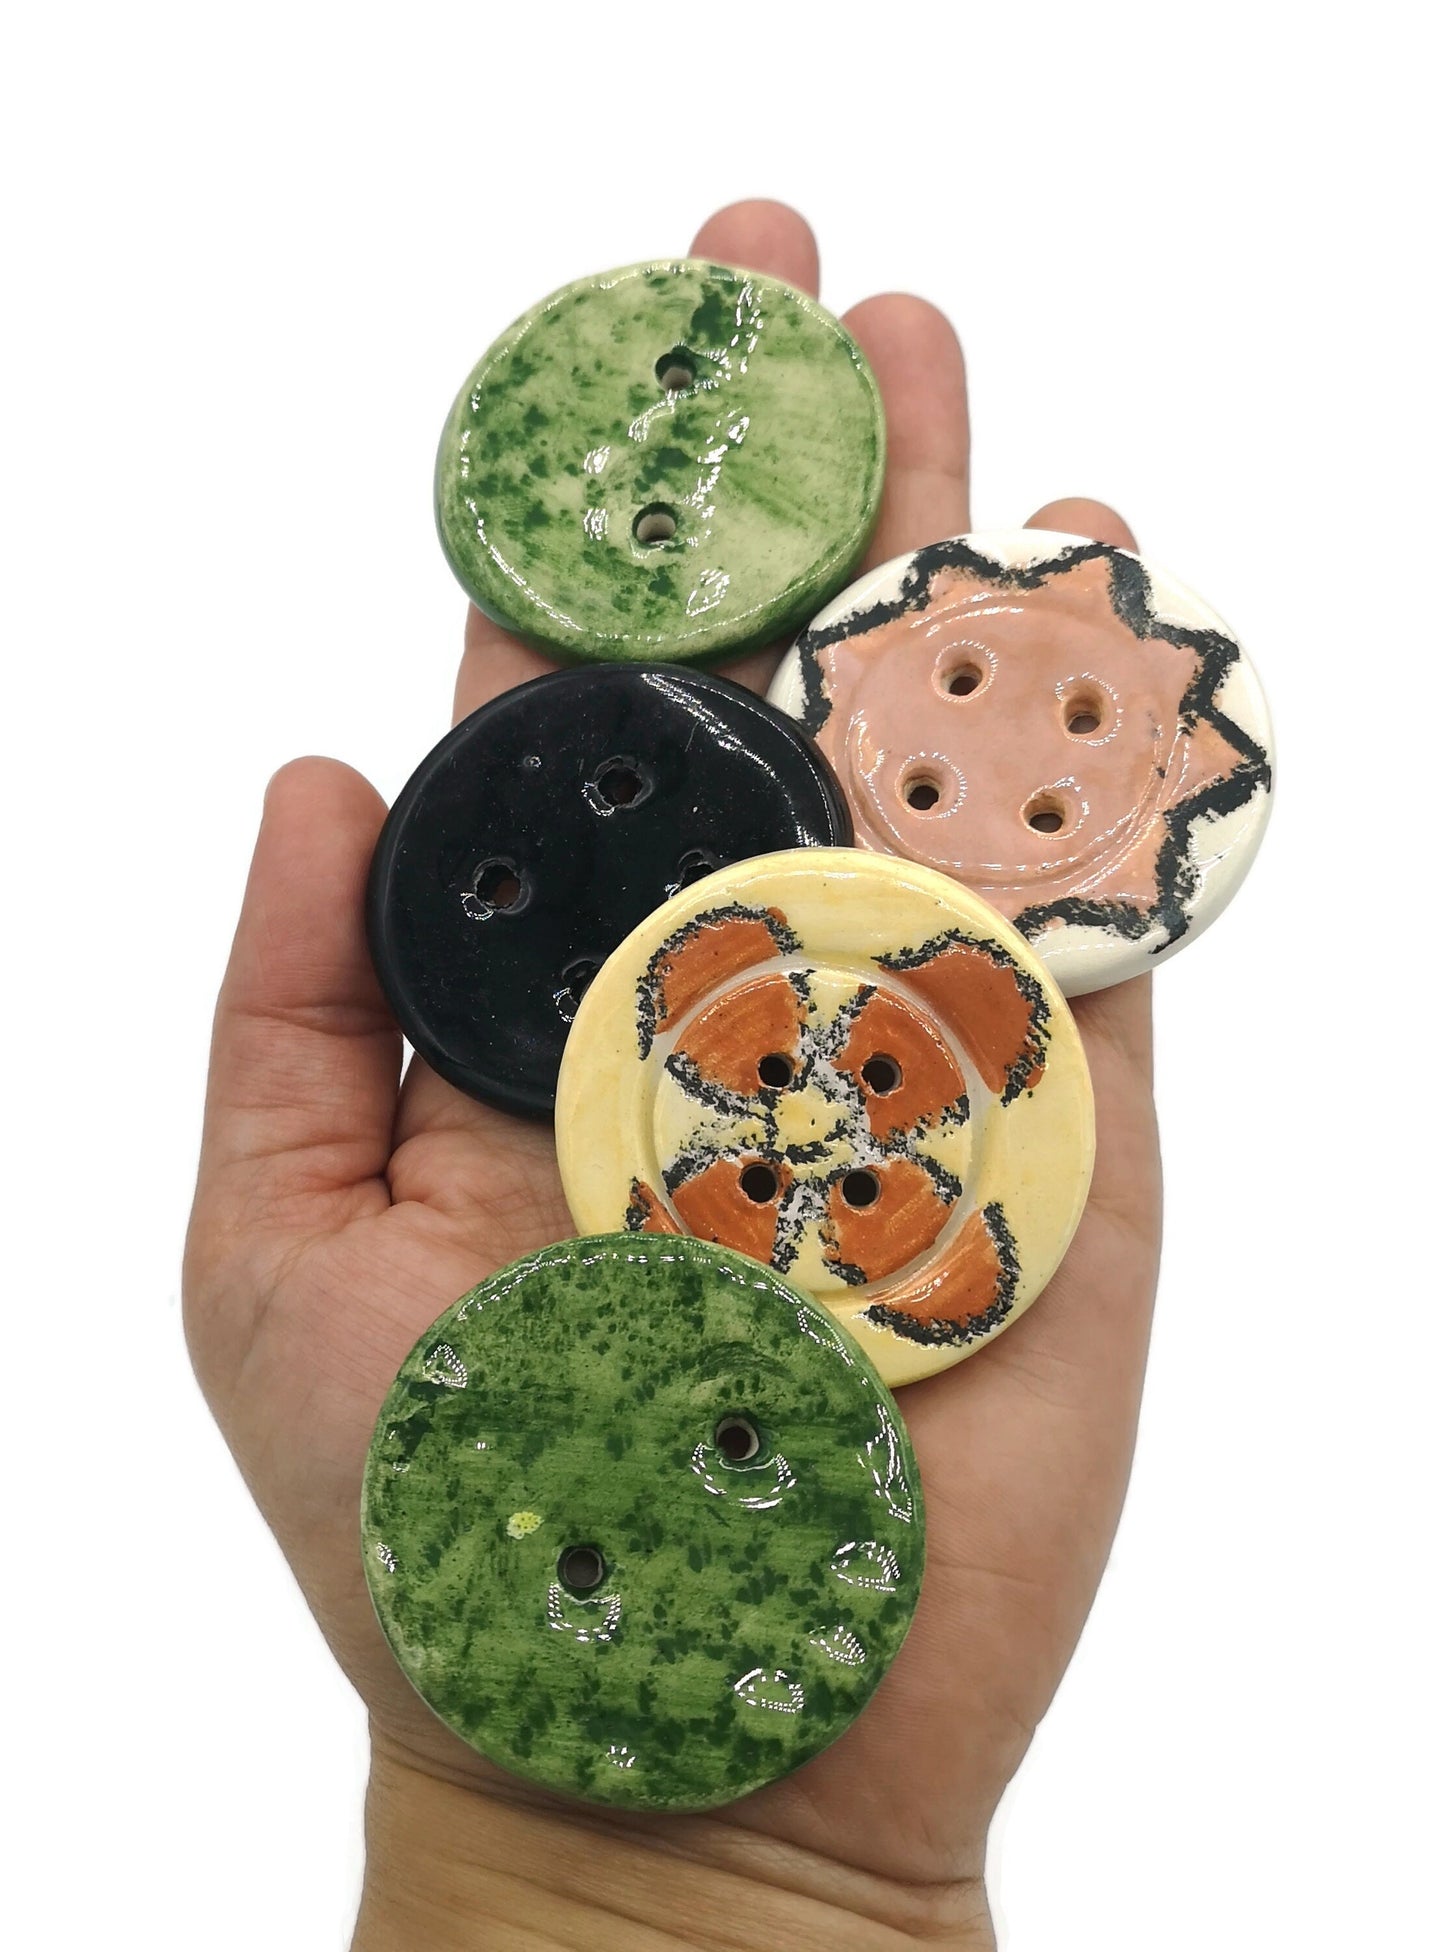 5Pc Extra Large Novelty Buttons For Coat, Elegant Ceramic Sewing Buttons Handmade And Hand Painted, Best Sellers Sewing Supplies And Notions - Ceramica Ana Rafael